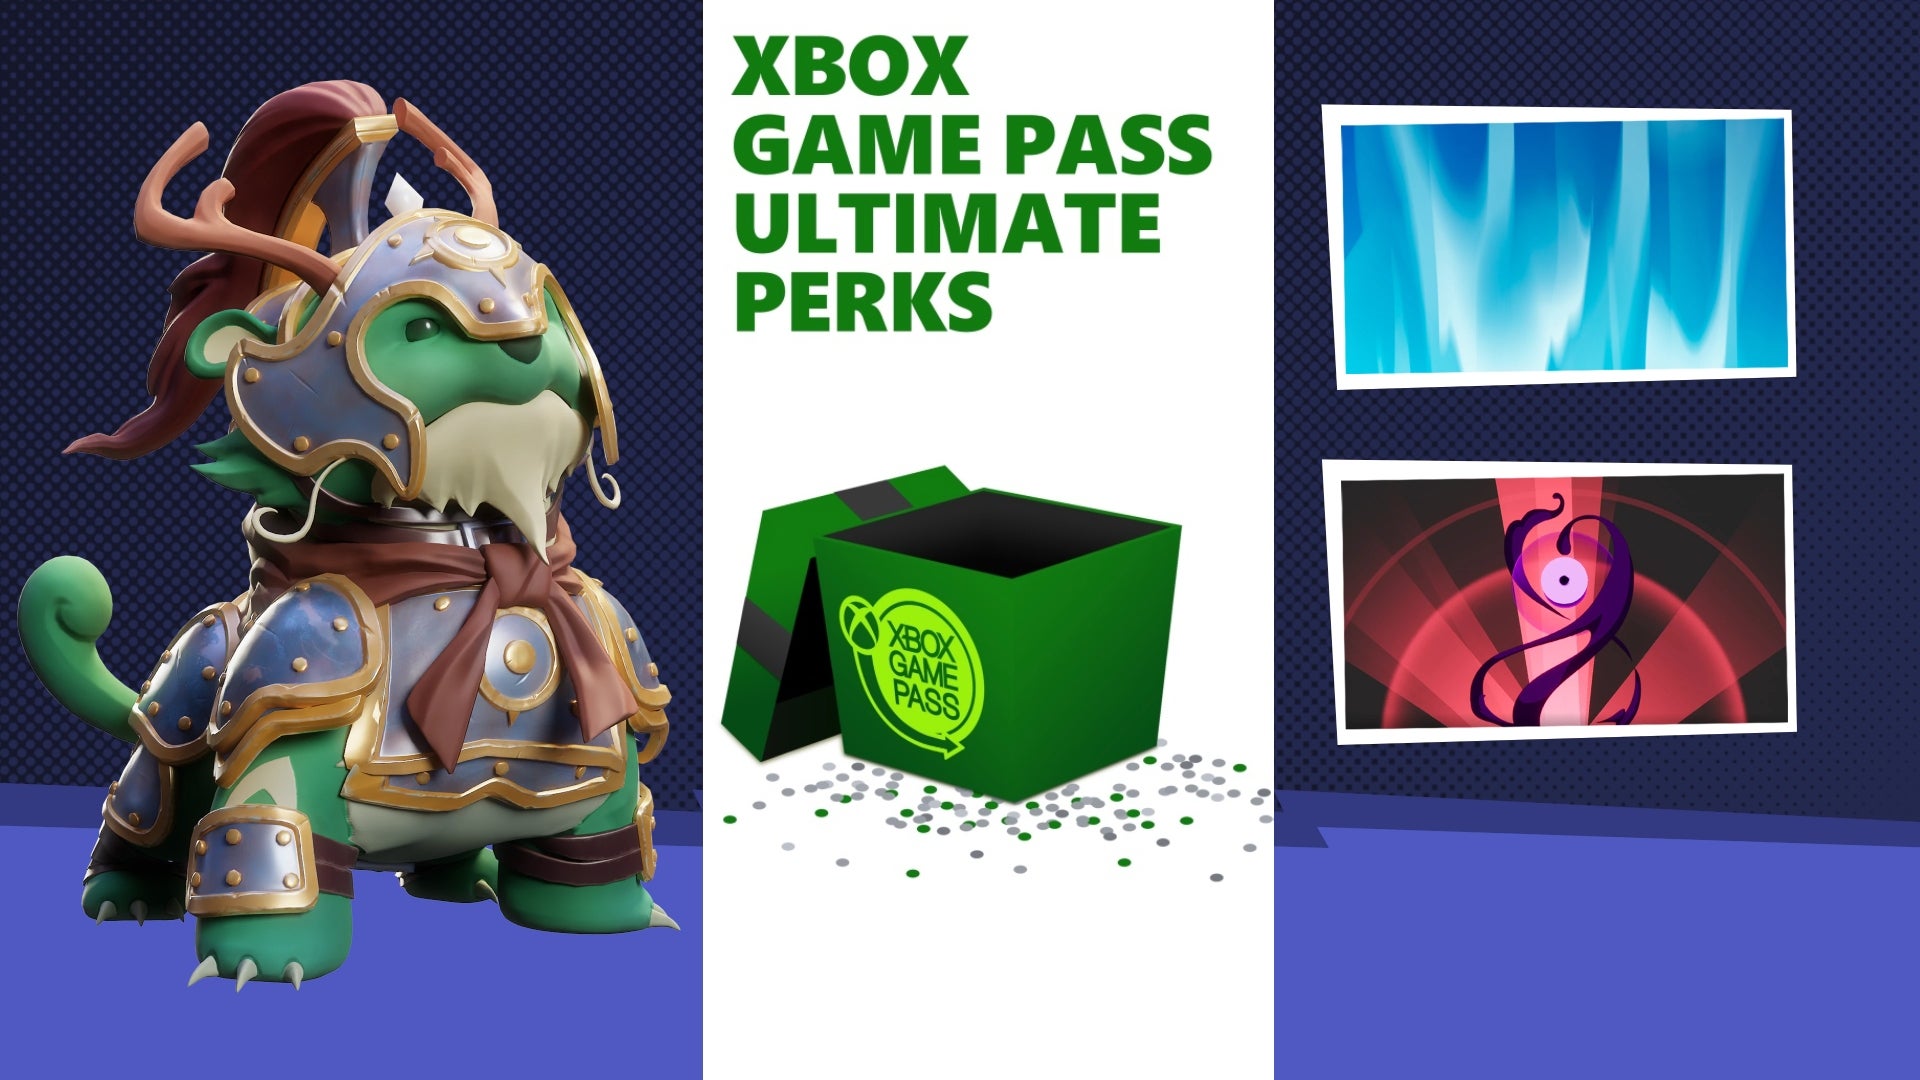 Image for Xbox Game Pass Ultimate subscribers: don't miss out on your bonus MultiVersus perk in August